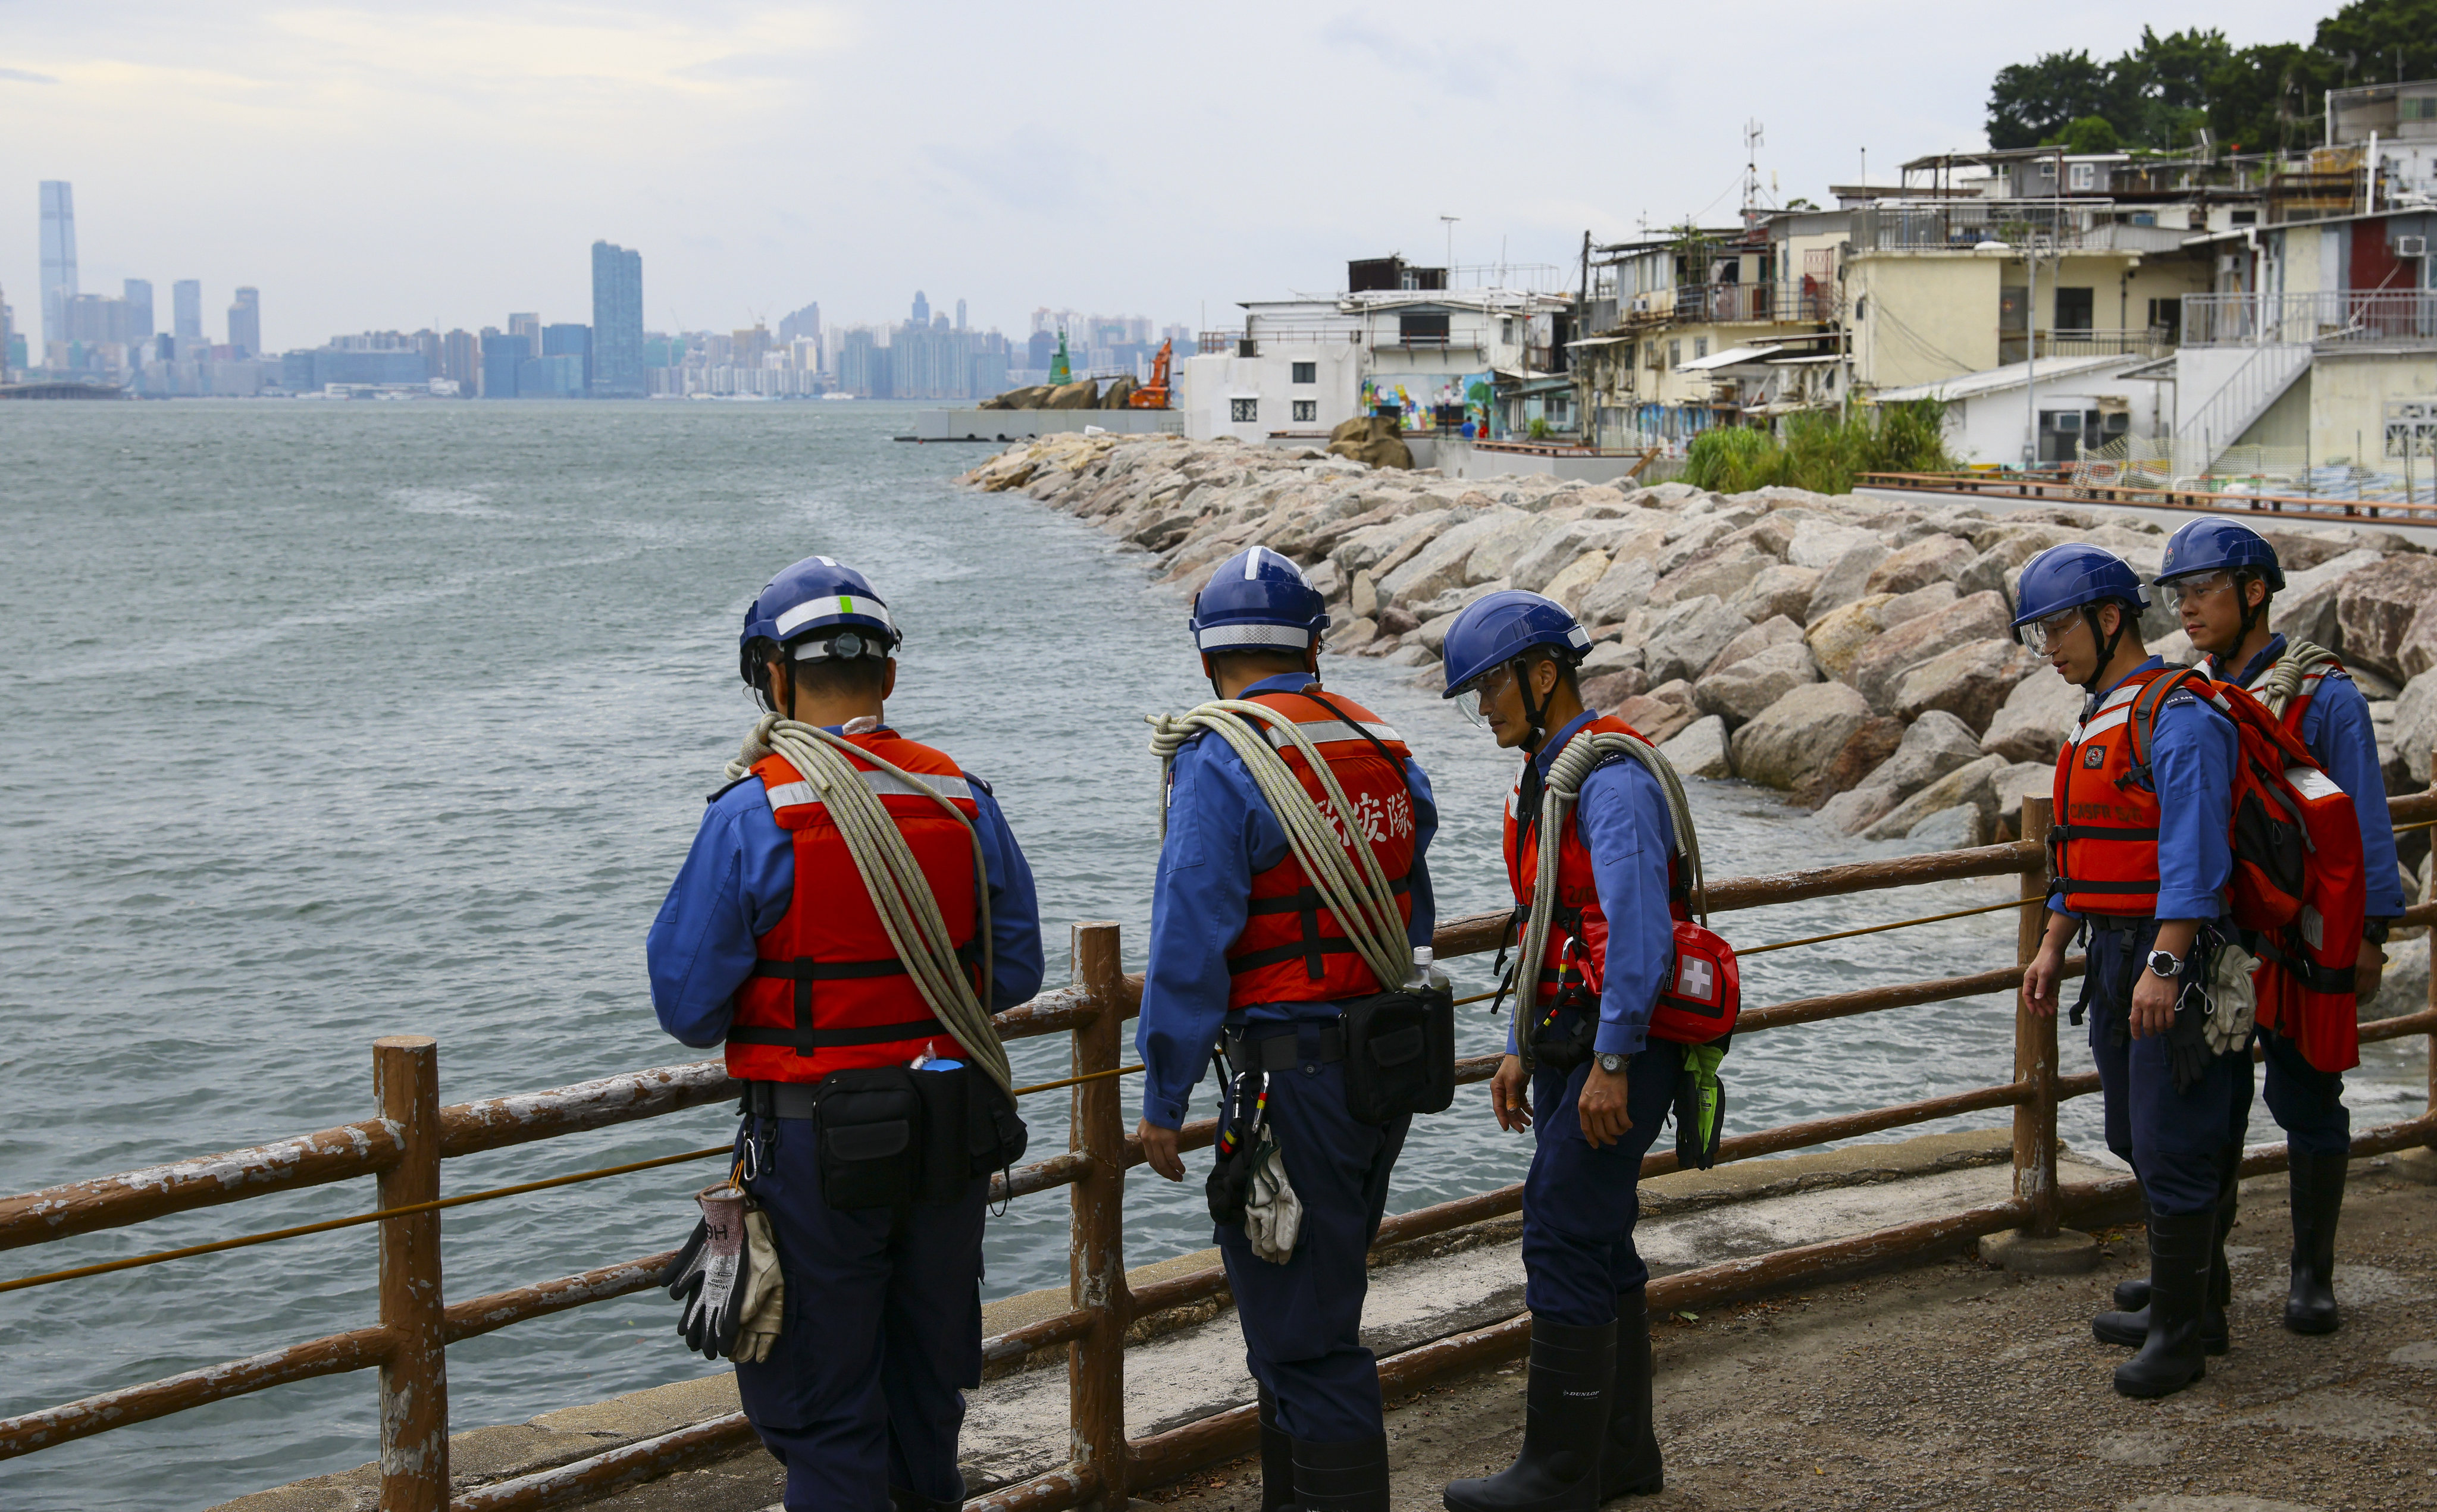 The Civil Aid Service has been inspecting coastal areas for flooding threats. Photo: Dickson Lee